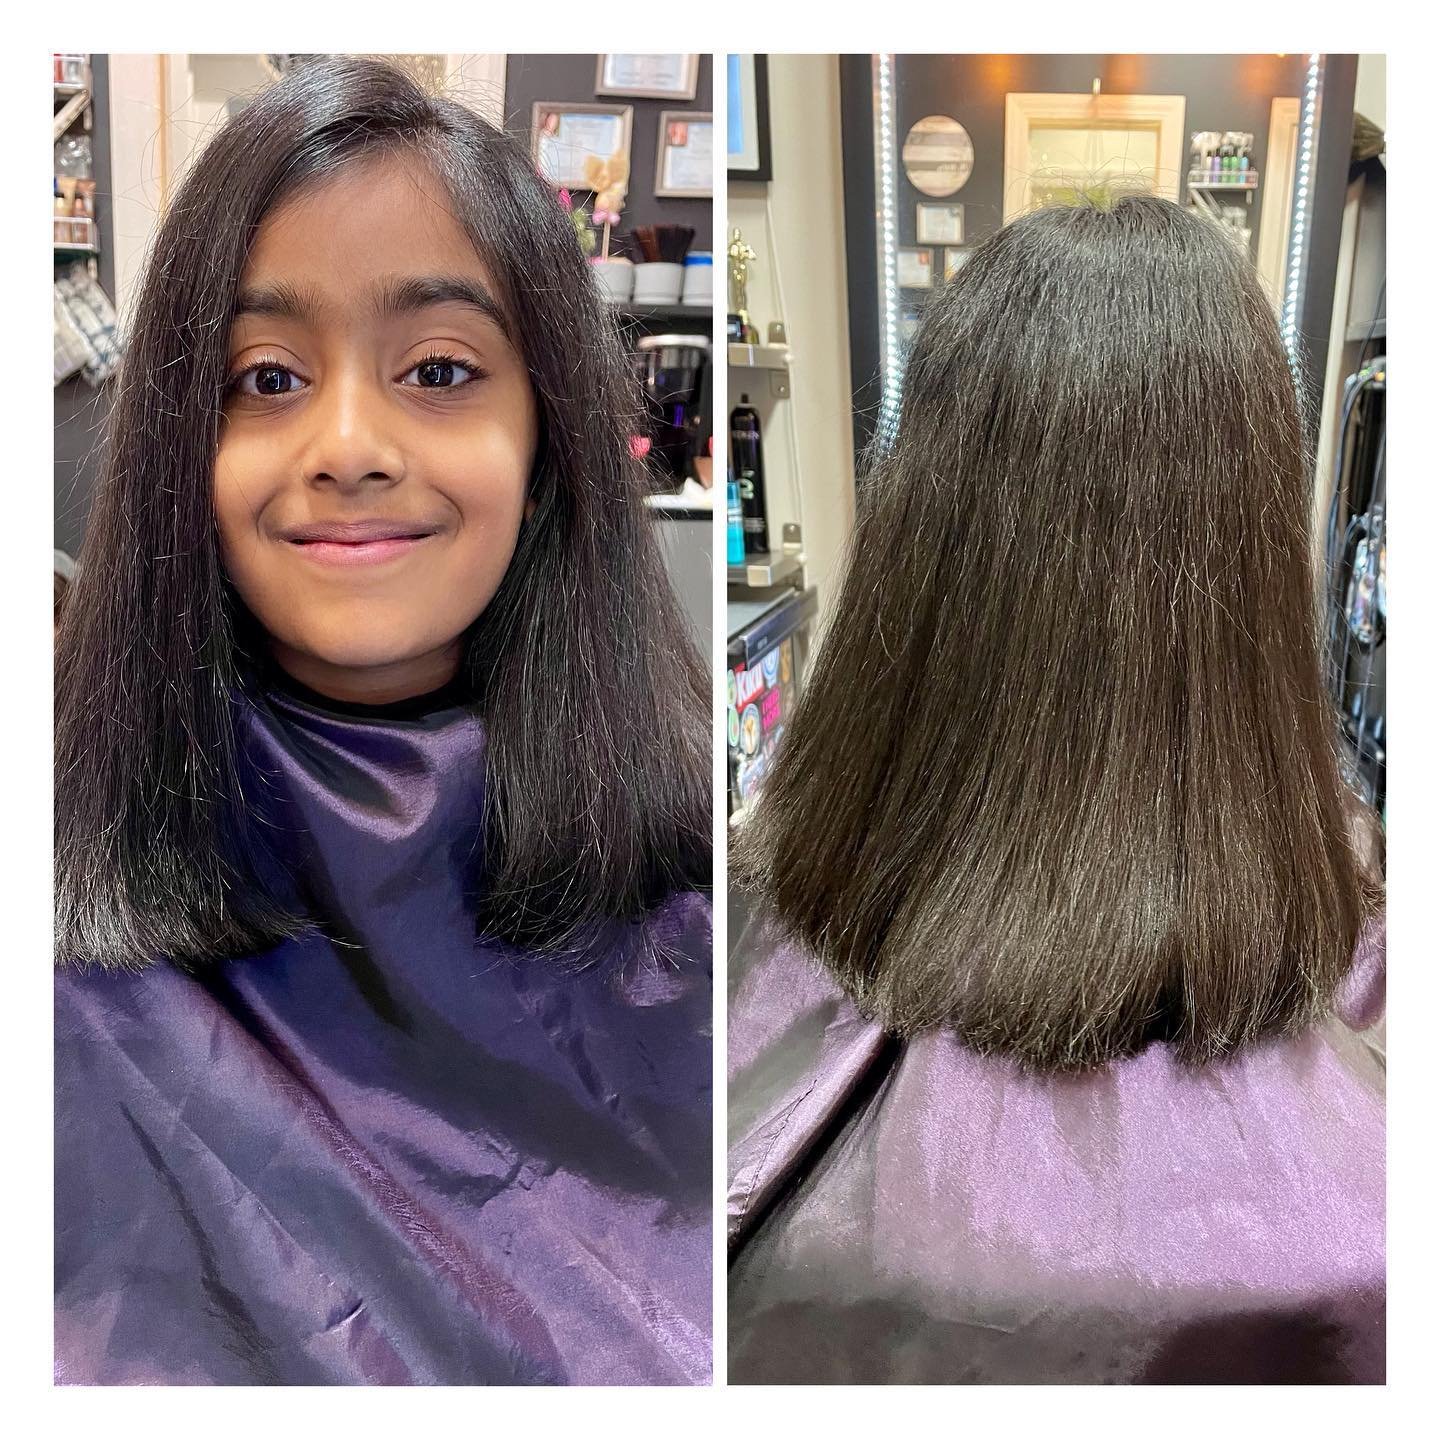 Kids cuts 🩷Kids cuts 🩵Kids cuts ✅ Yes we do little ladies haircuts and styles too. Cindy got to do 2 mini makeovers. Both sisters Shanya &amp; Shivika both wanted a big change so Cindy did a big chop ✂️ and cut off 5inches &amp; 4inches off each of